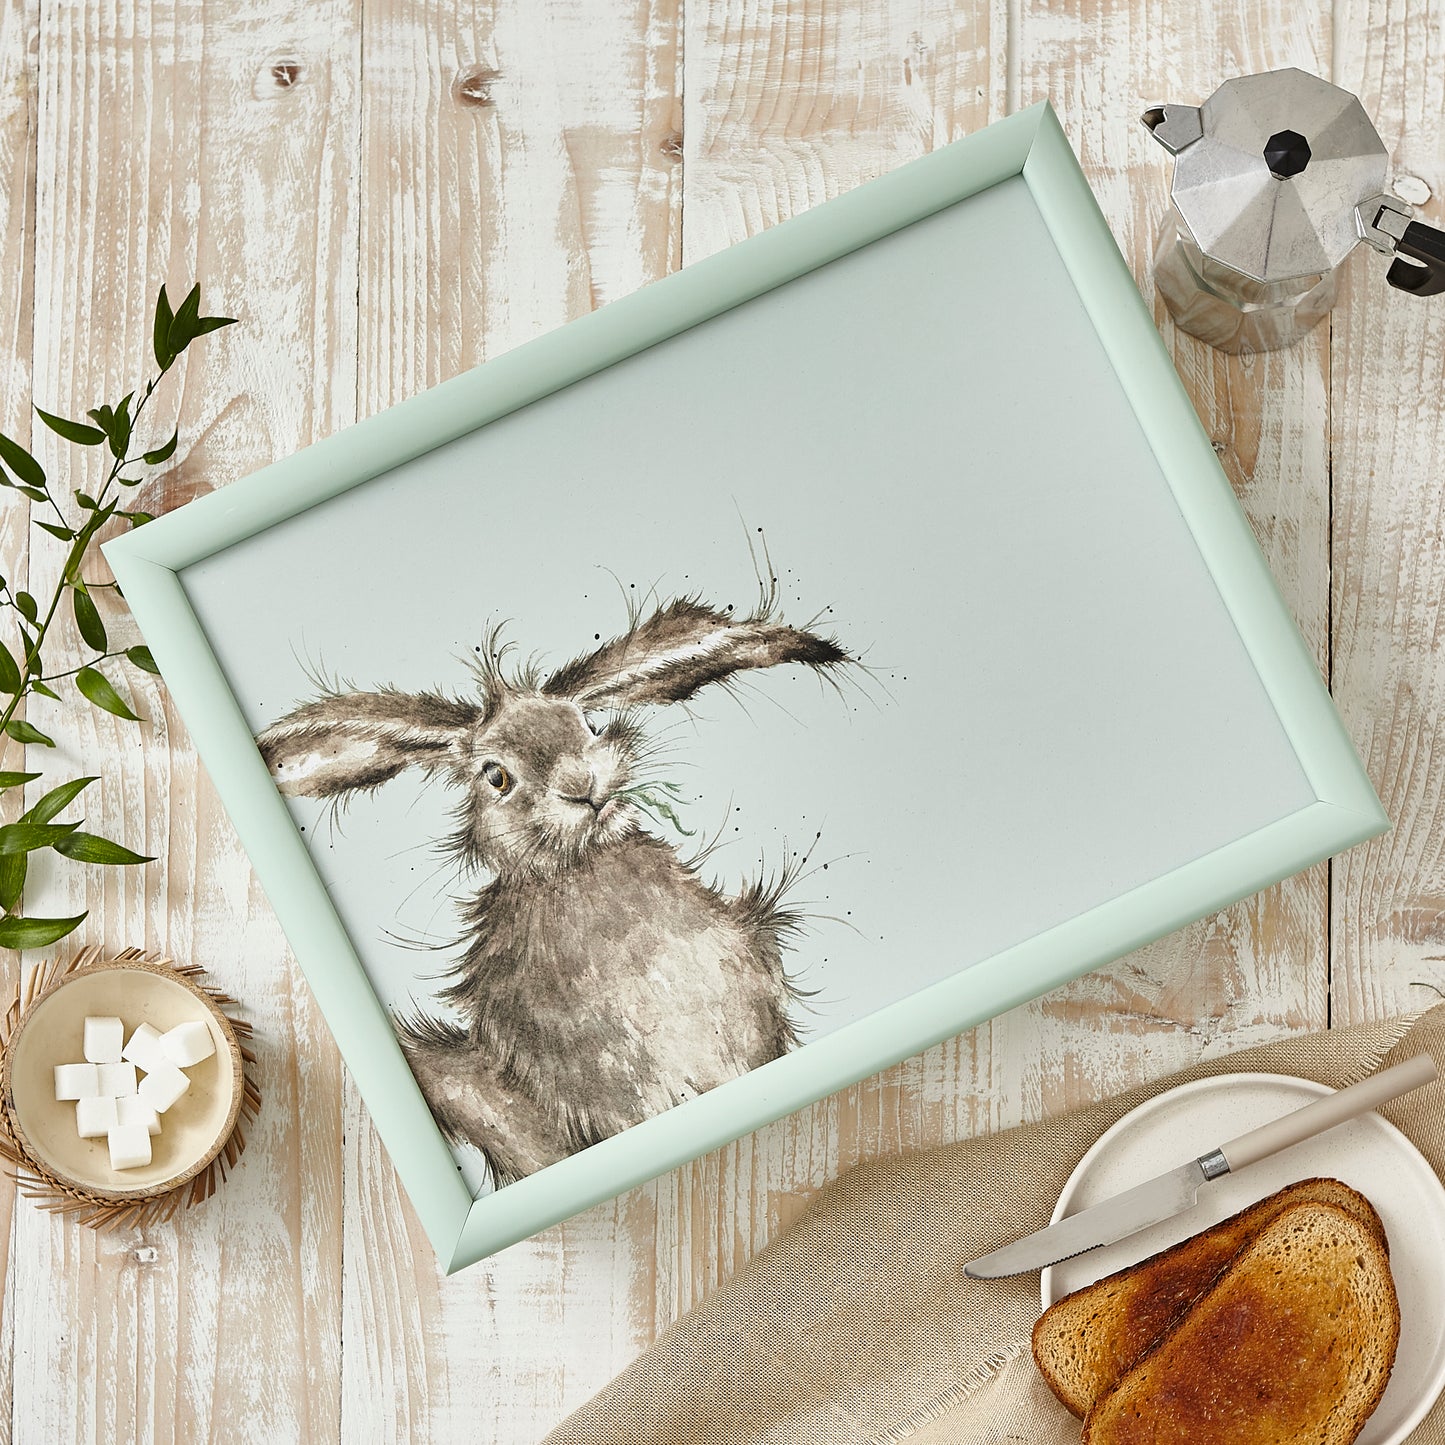 Royal Worcester Wrendale Designs Hare Brained Cushioned Lap Tray